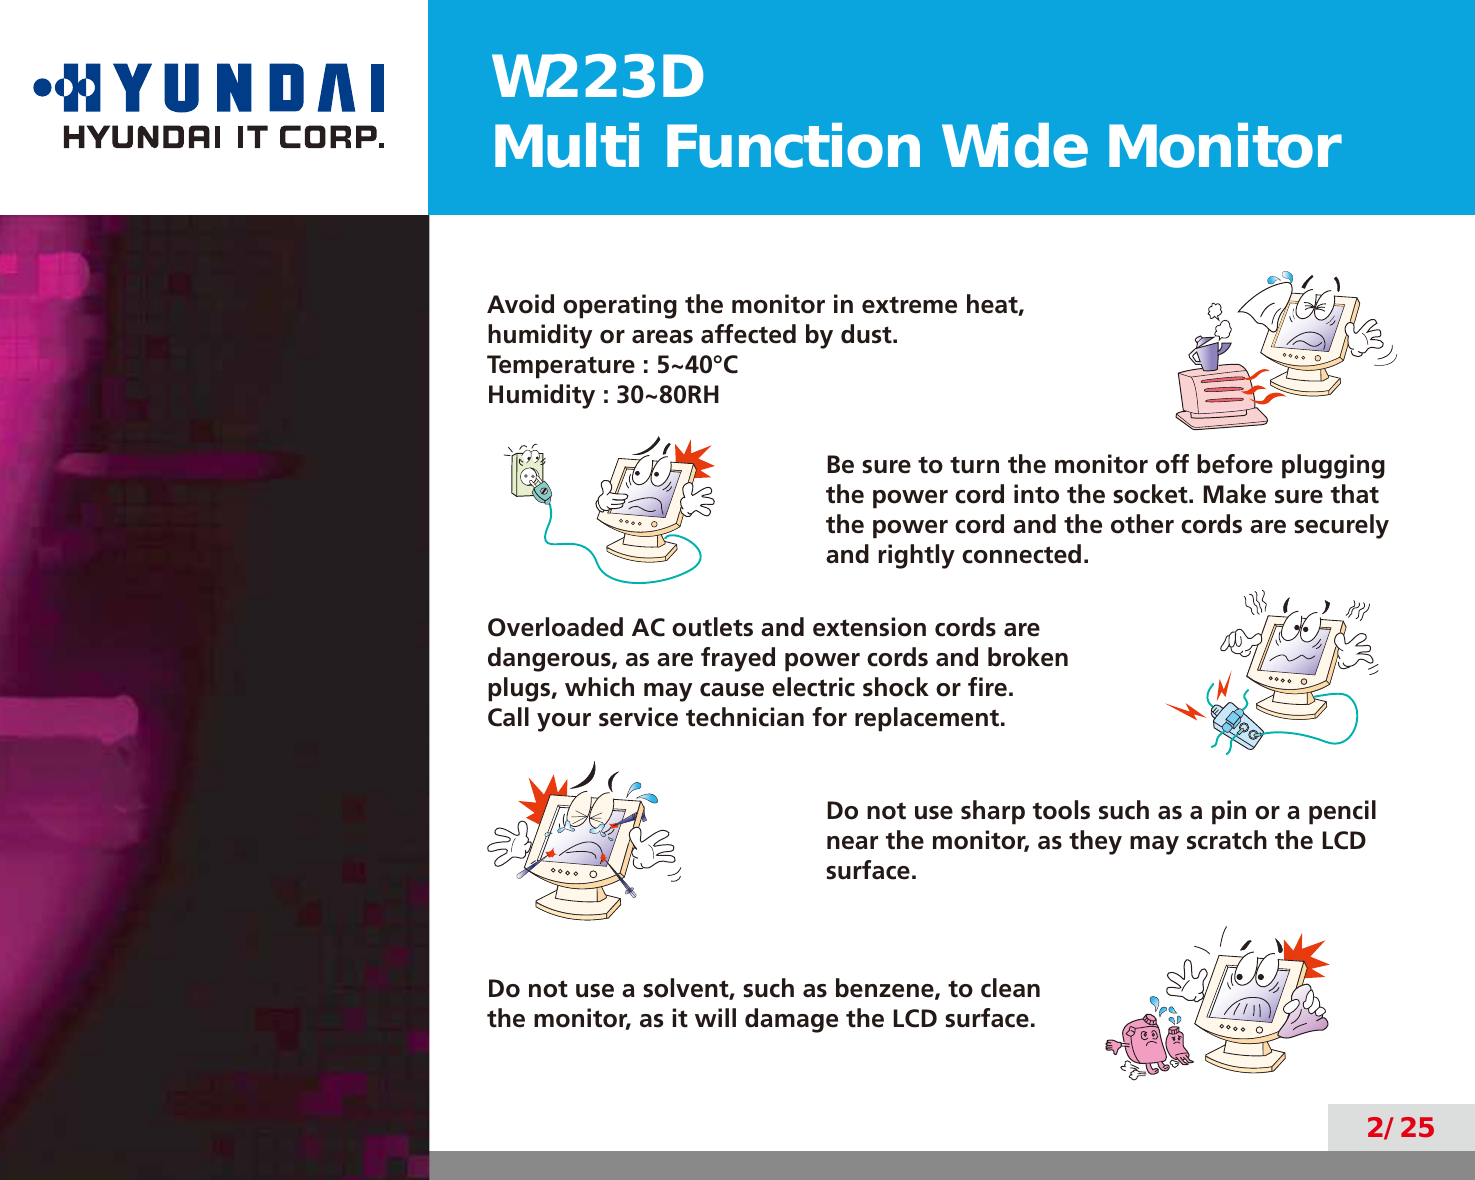 W223DMulti Function Wide Monitor2/25Avoid operating the monitor in extreme heat,humidity or areas affected by dust.Temperature : 5~40°CHumidity : 30~80RHBe sure to turn the monitor off before plugging the power cord into the socket. Make sure that the power cord and the other cords are securely and rightly connected.Overloaded AC outlets and extension cords are dangerous, as are frayed power cords and broken plugs, which may cause electric shock or ﬁre.  Call your service technician for replacement.Do not use sharp tools such as a pin or a pencil near the monitor, as they may scratch the LCD surface.Do not use a solvent, such as benzene, to clean the monitor, as it will damage the LCD surface.